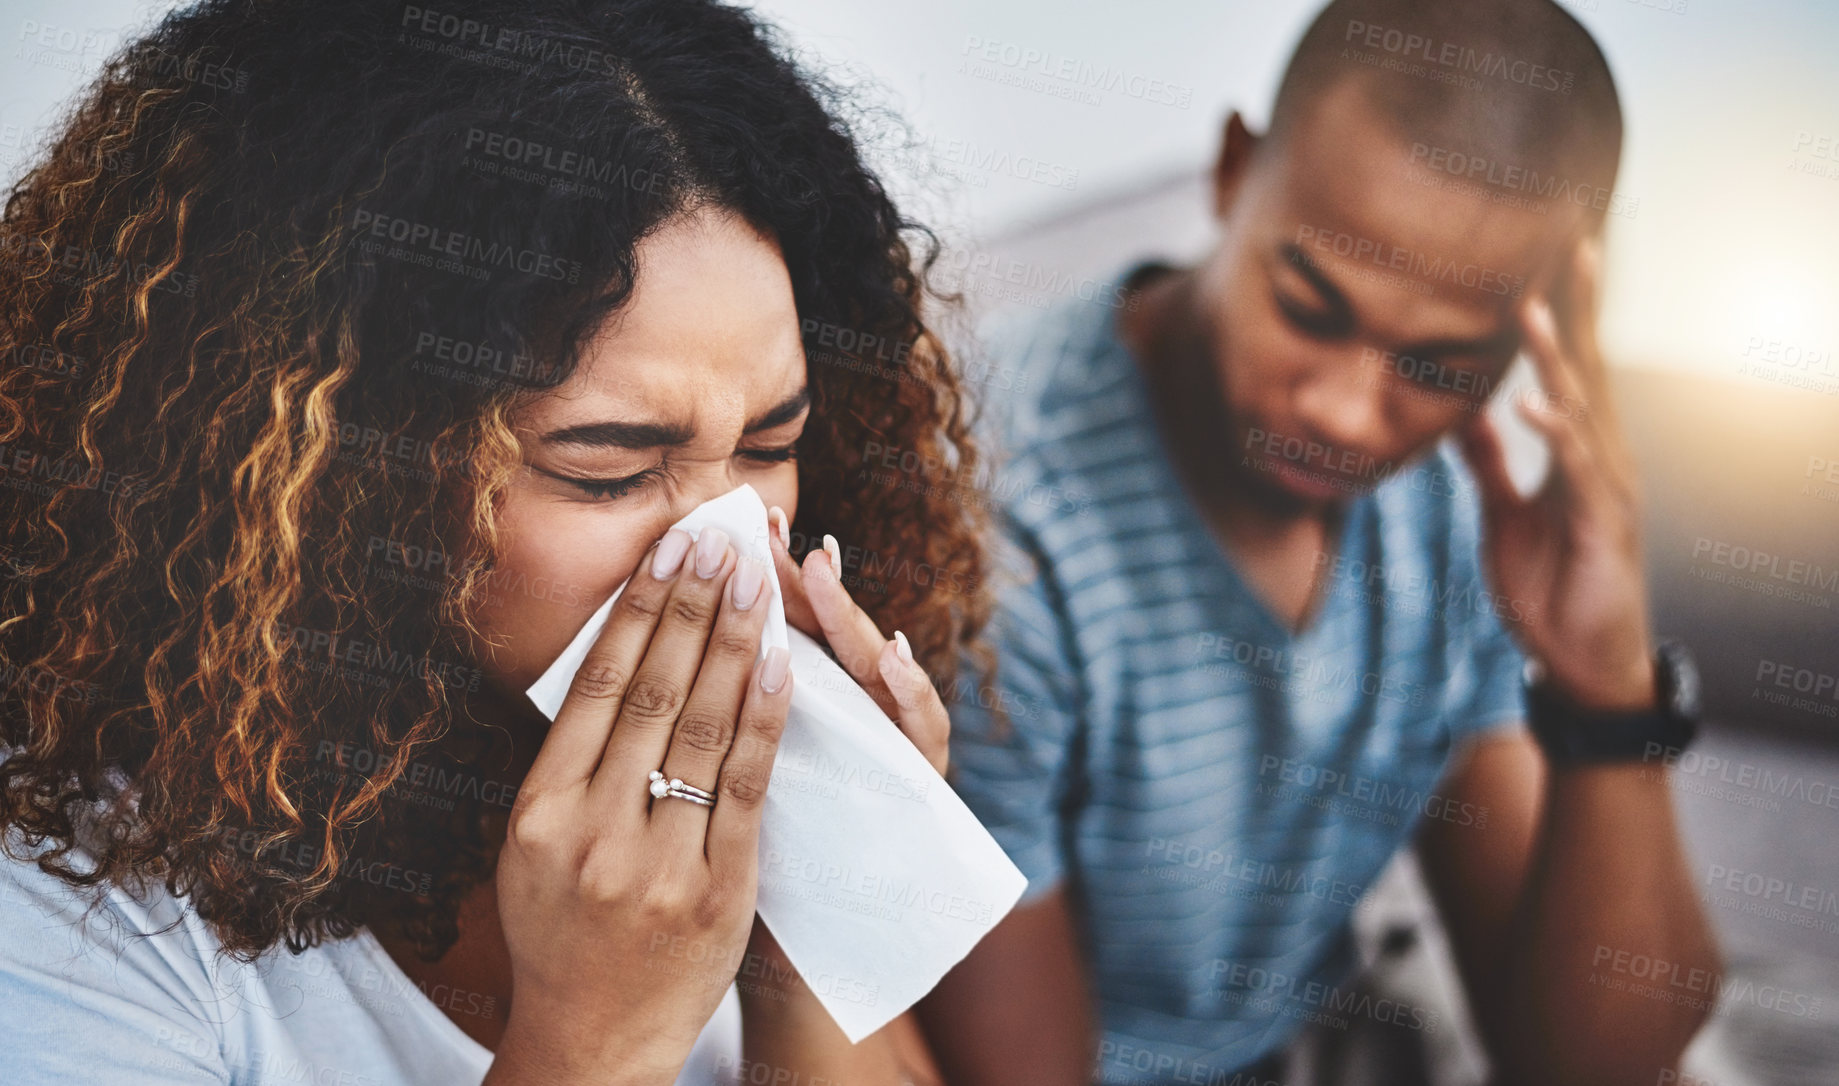 Buy stock photo Shot of a young woman blowing her nose with her boyfriend looking irritated in the background